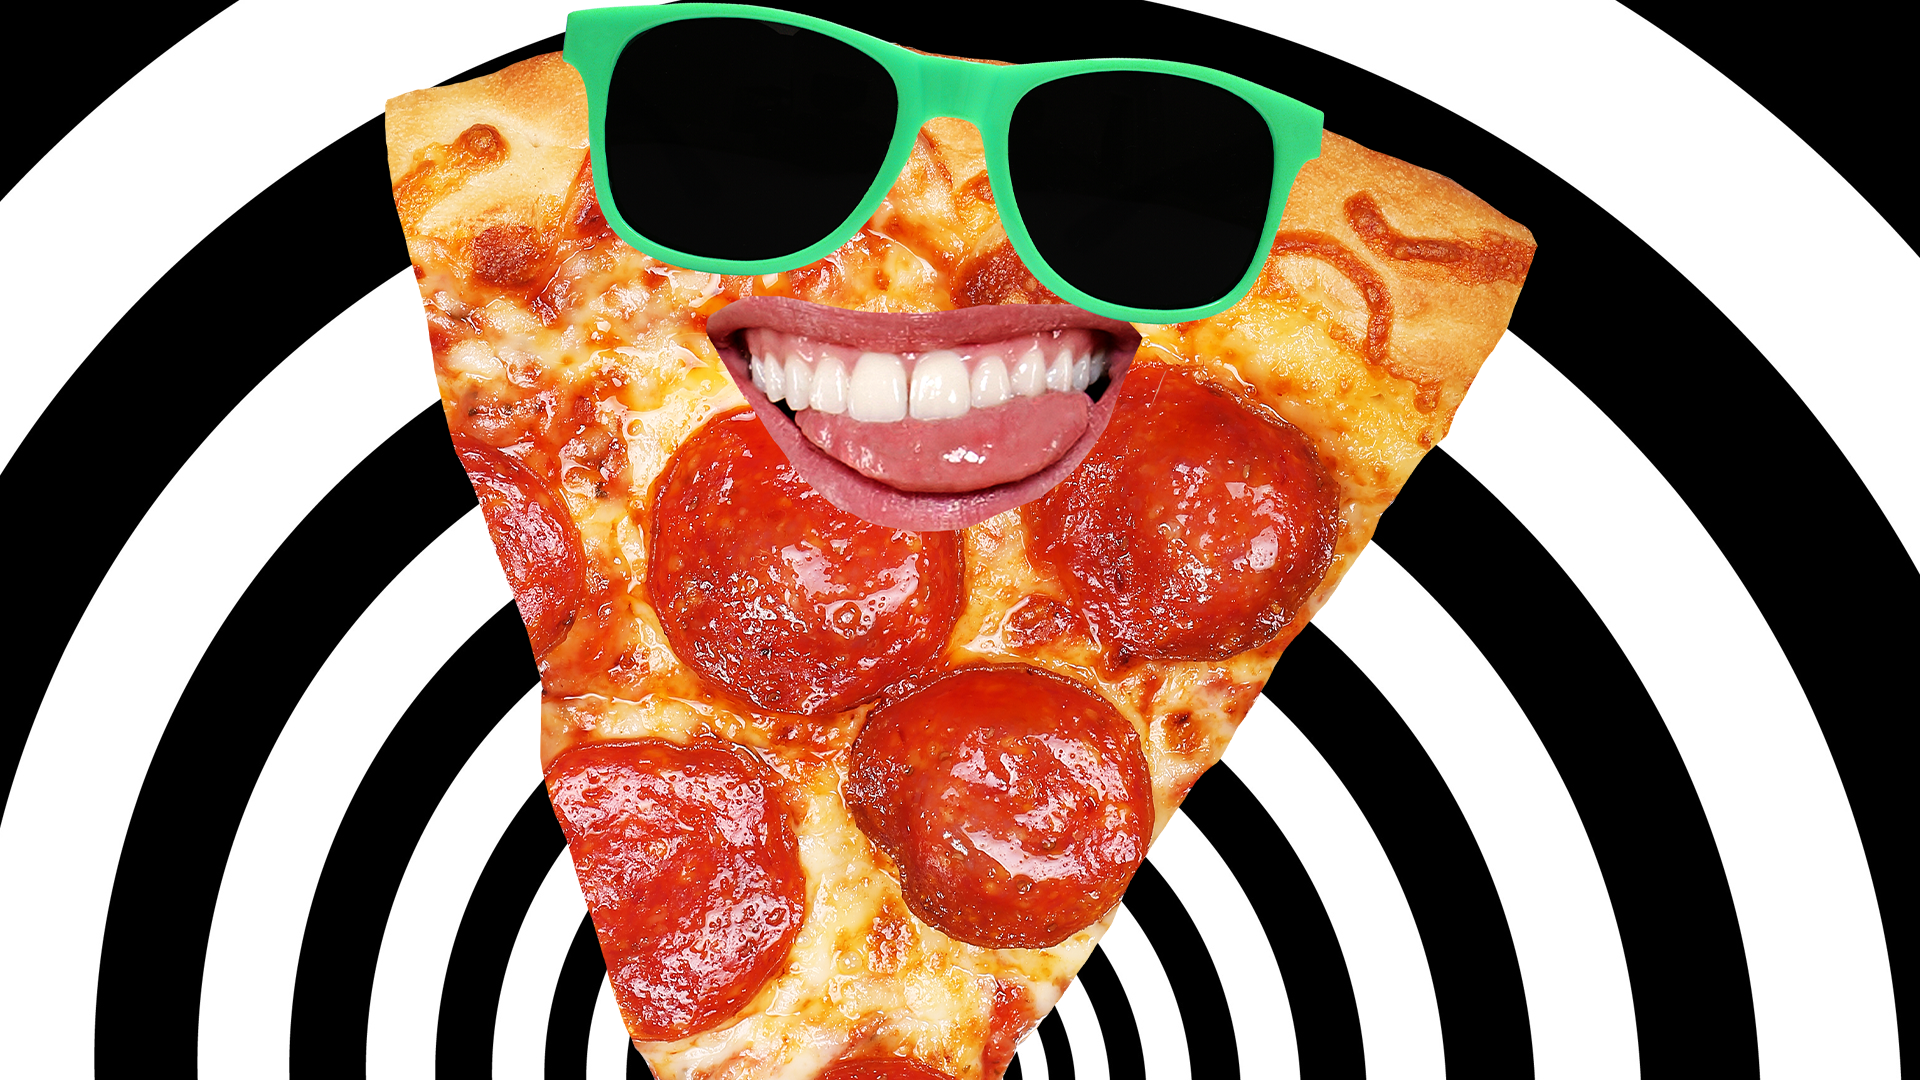 Pizza slice with sunglasses on black and white background